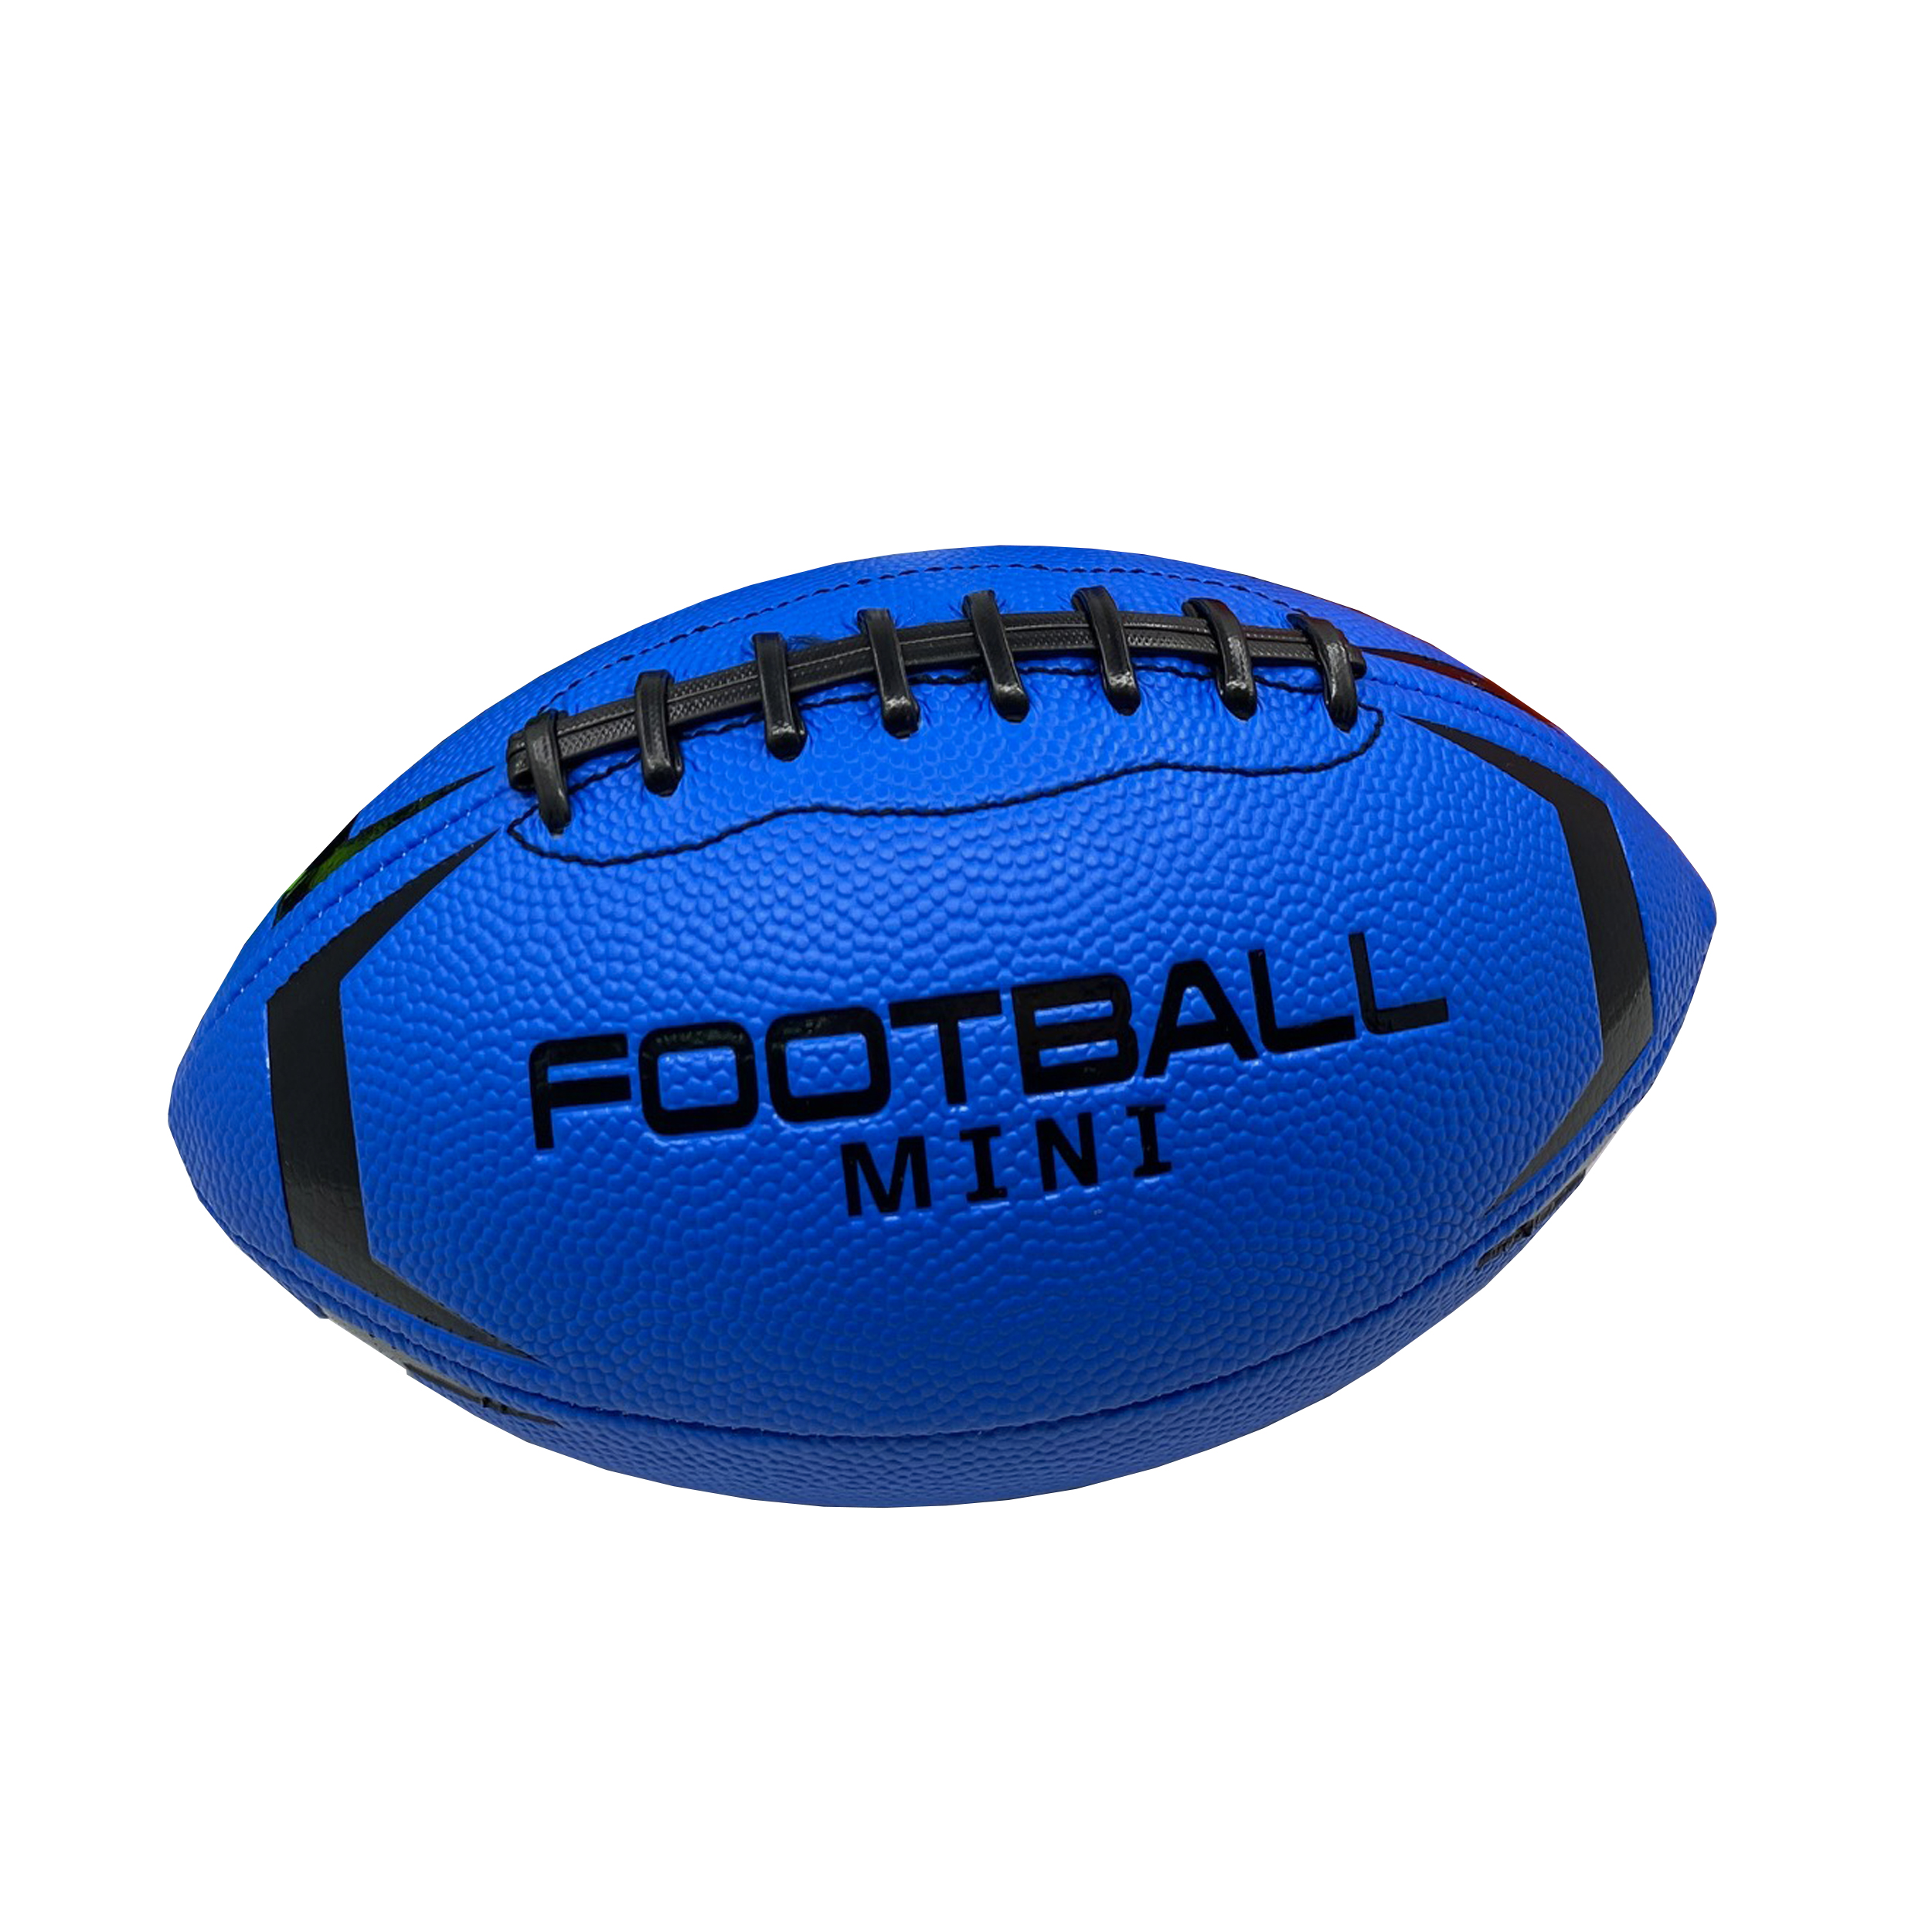 Magic Time Mini 6” Rubber Football Toy Ball, Kids Teen, Unisex, Assorted Colors Black, Red, Blue - image 2 of 7